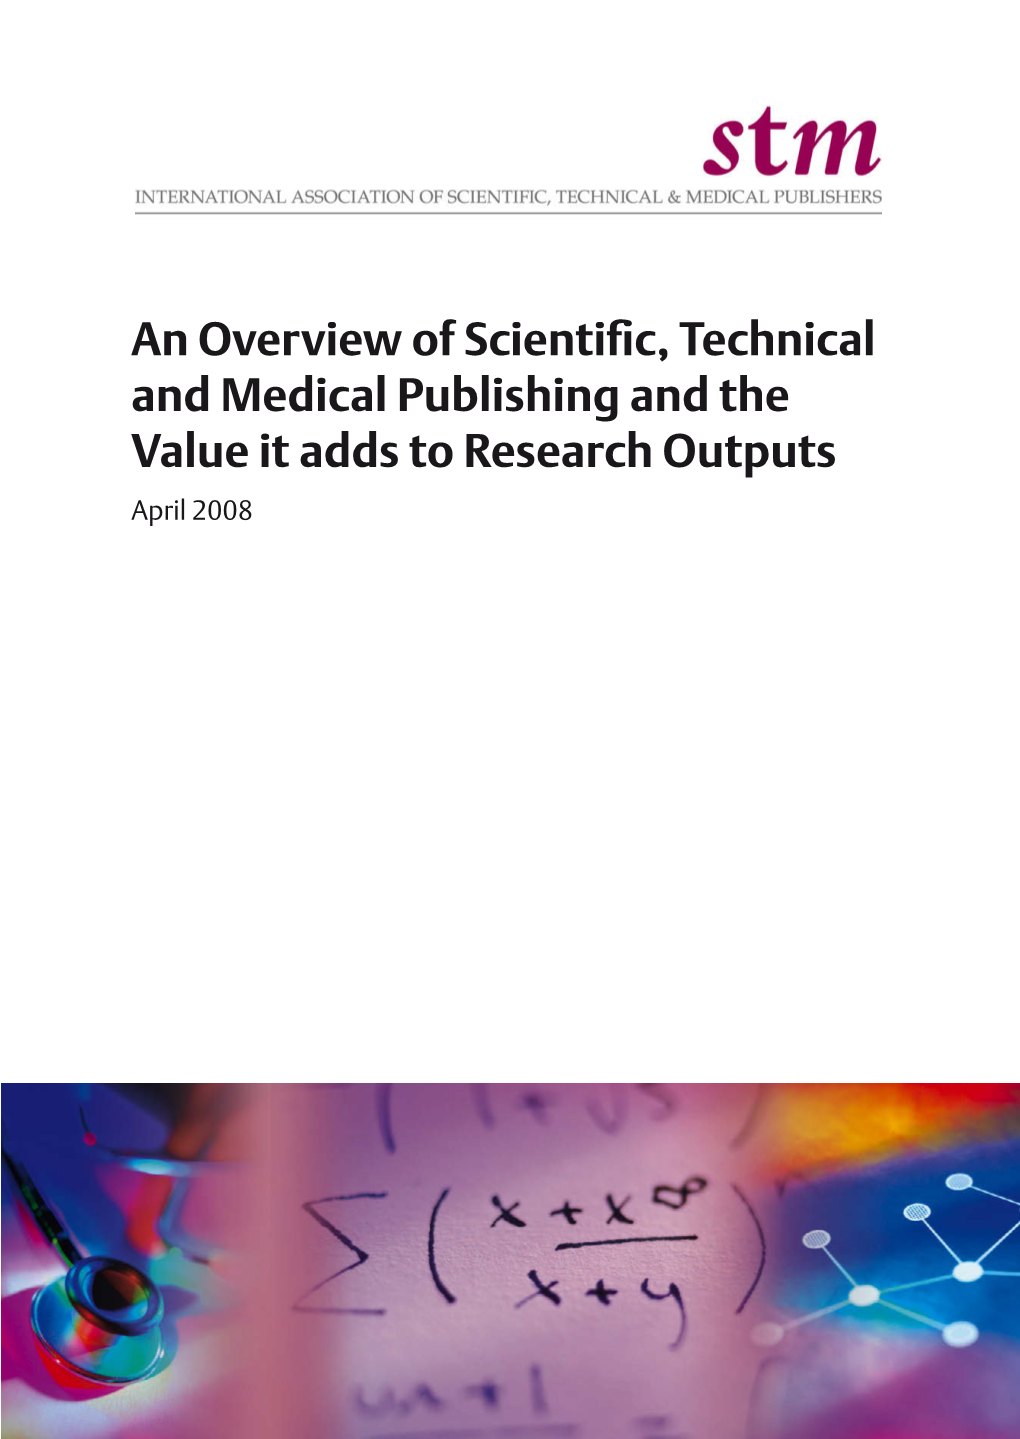 Overview of STM Publishing